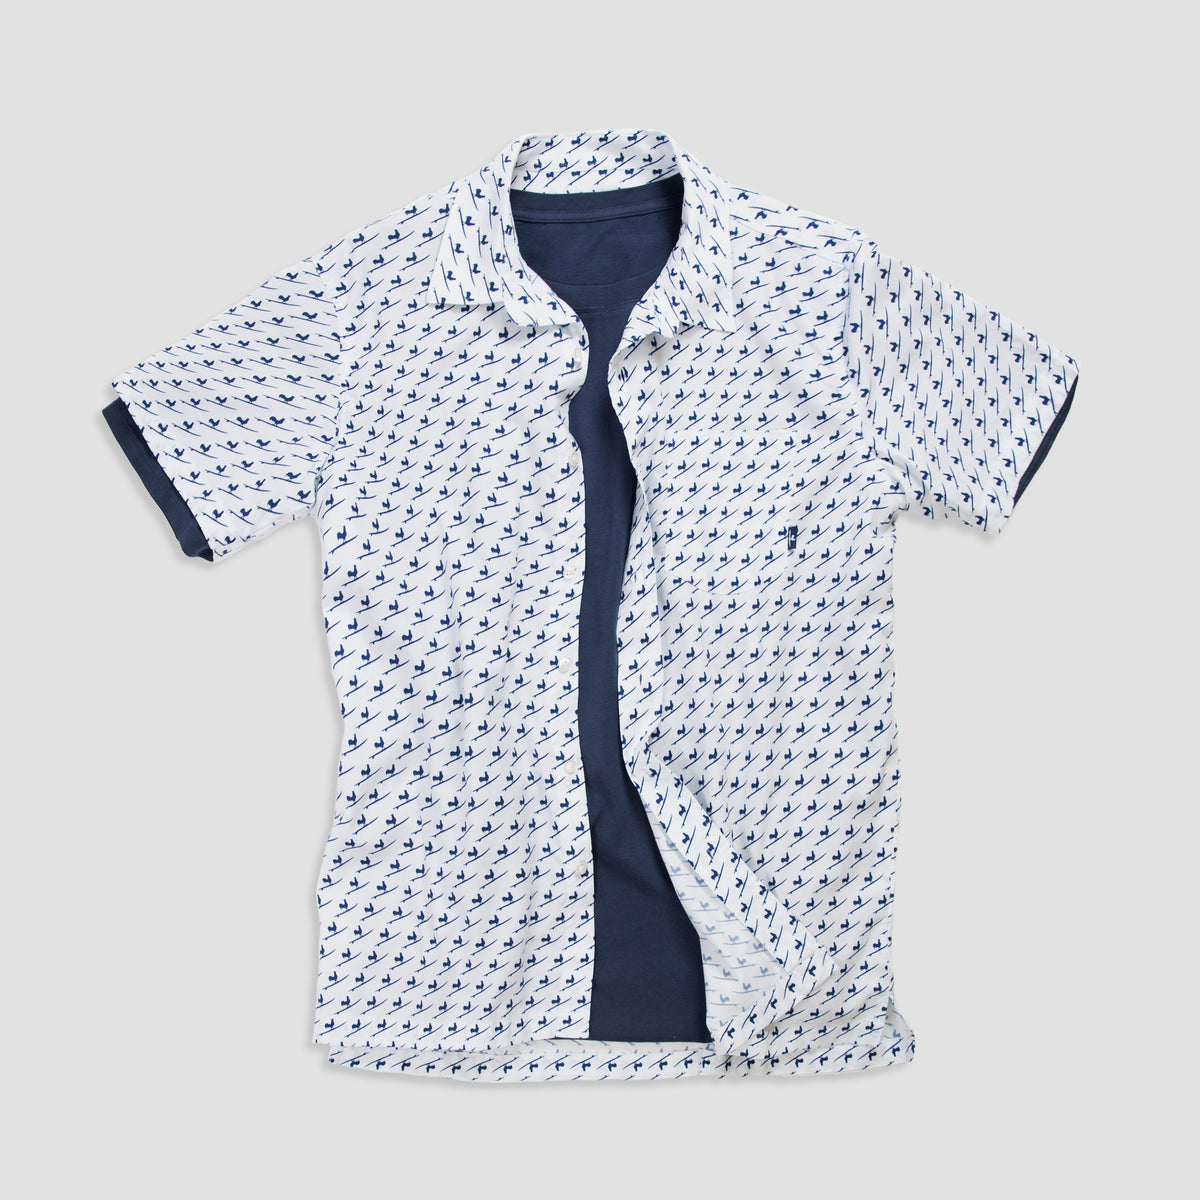 Surfing Rooster Woven Shirt